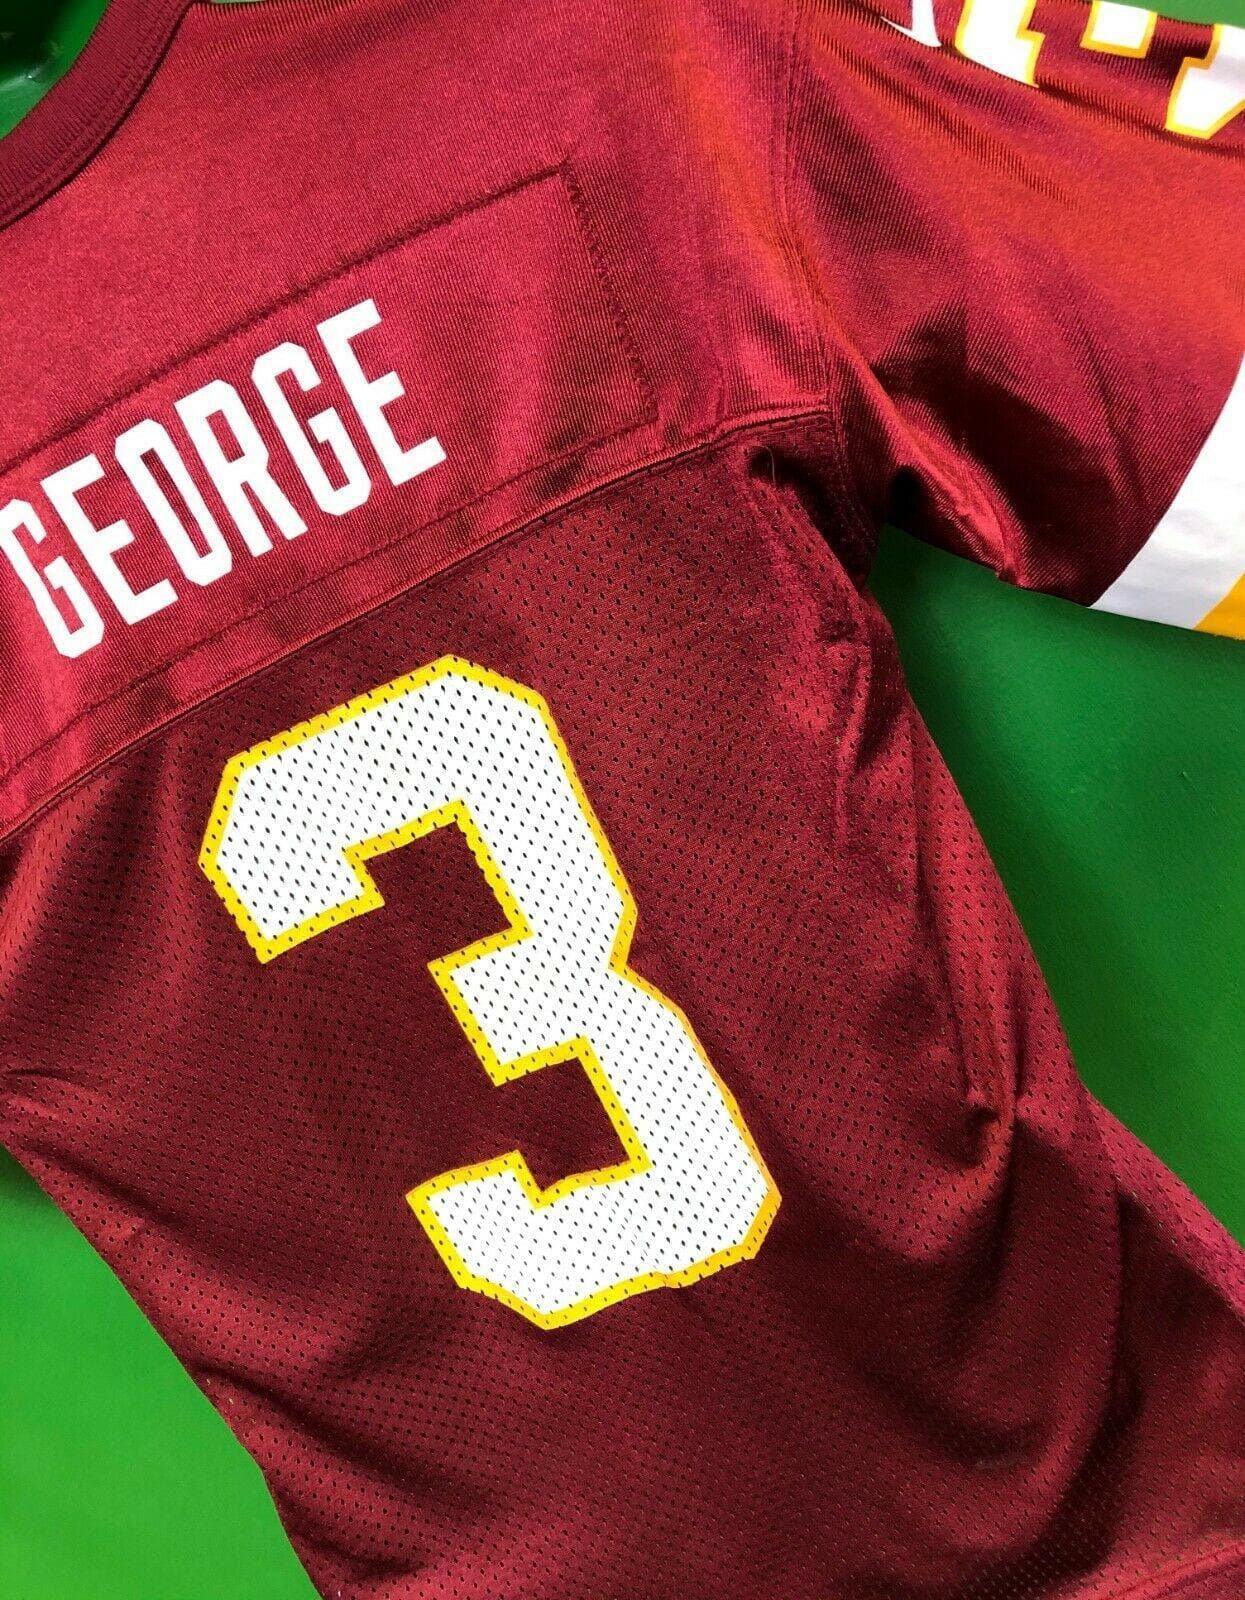 NFL Washington Commanders (Redskins) Jeff George #3 Jersey Youth Small 10